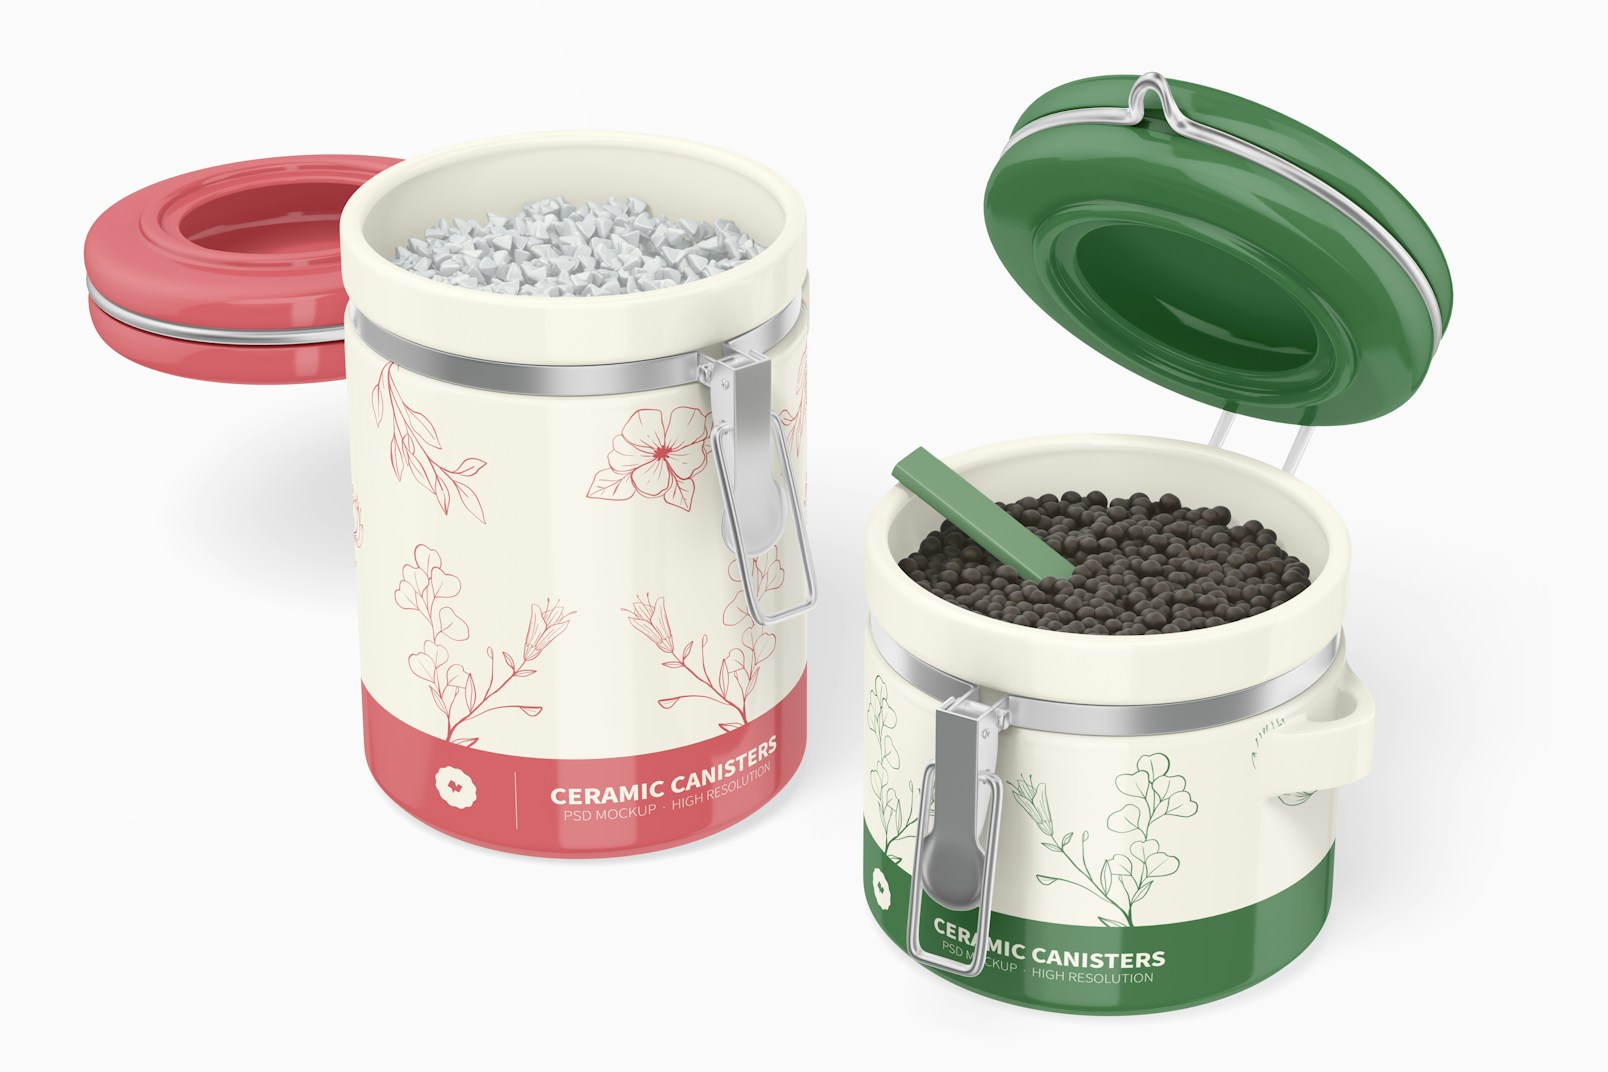 Ceramic Canisters with Spoon Mockup, Opened